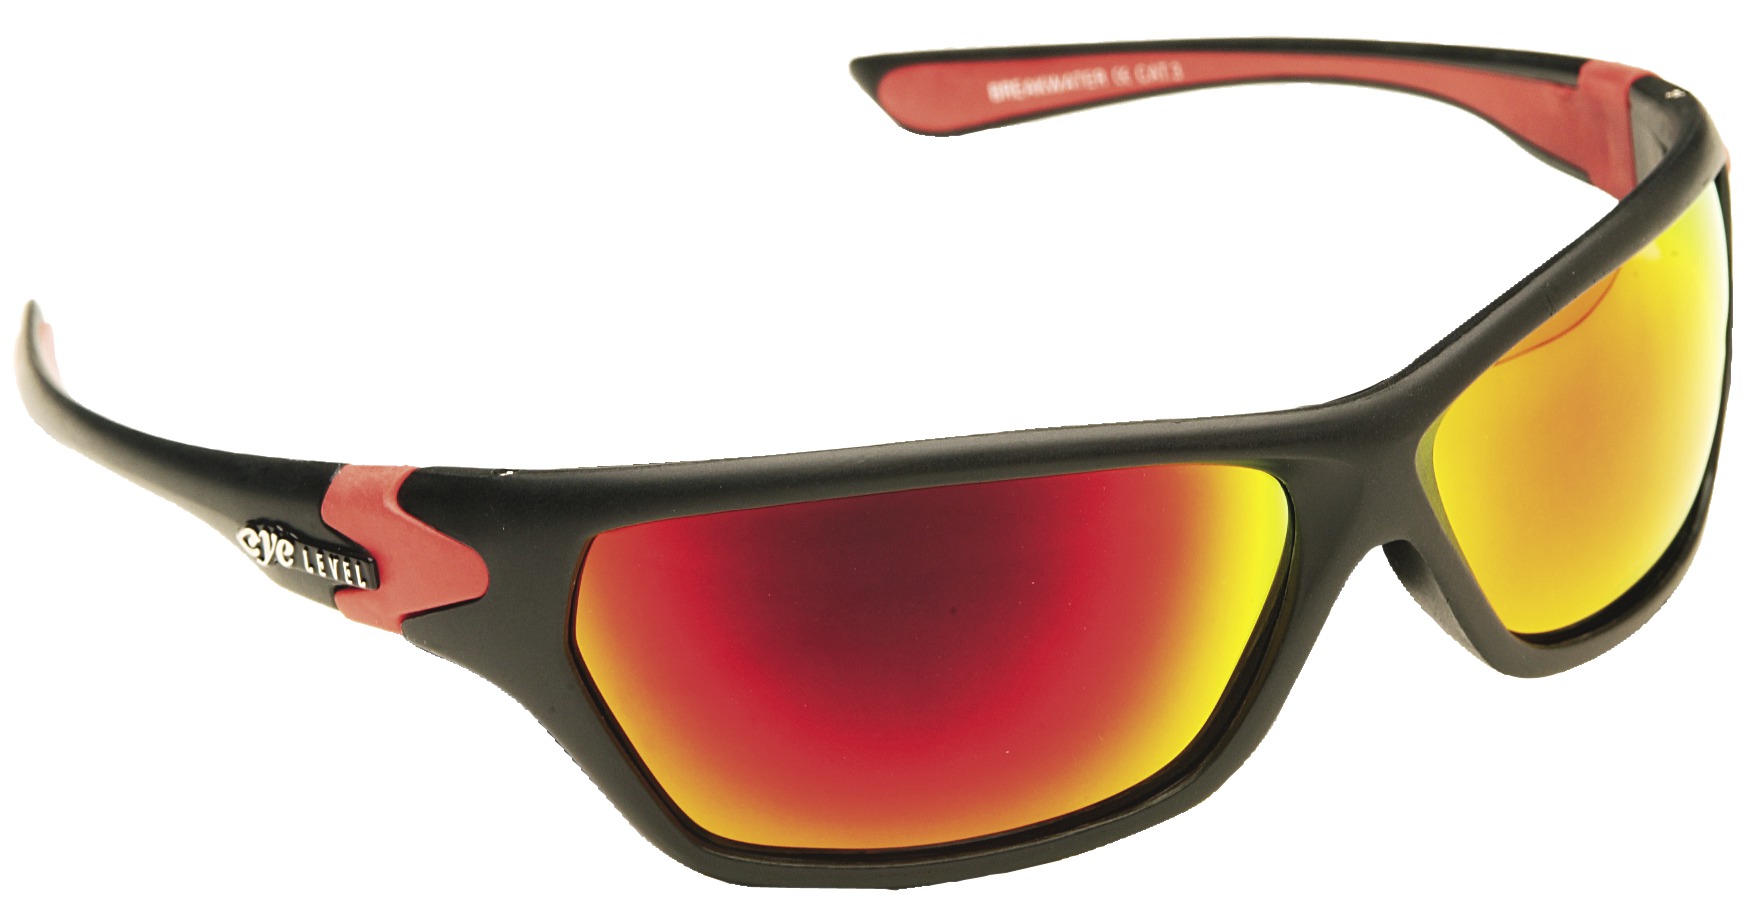 Buy Oakley sunglasses online at low prices (968 products)